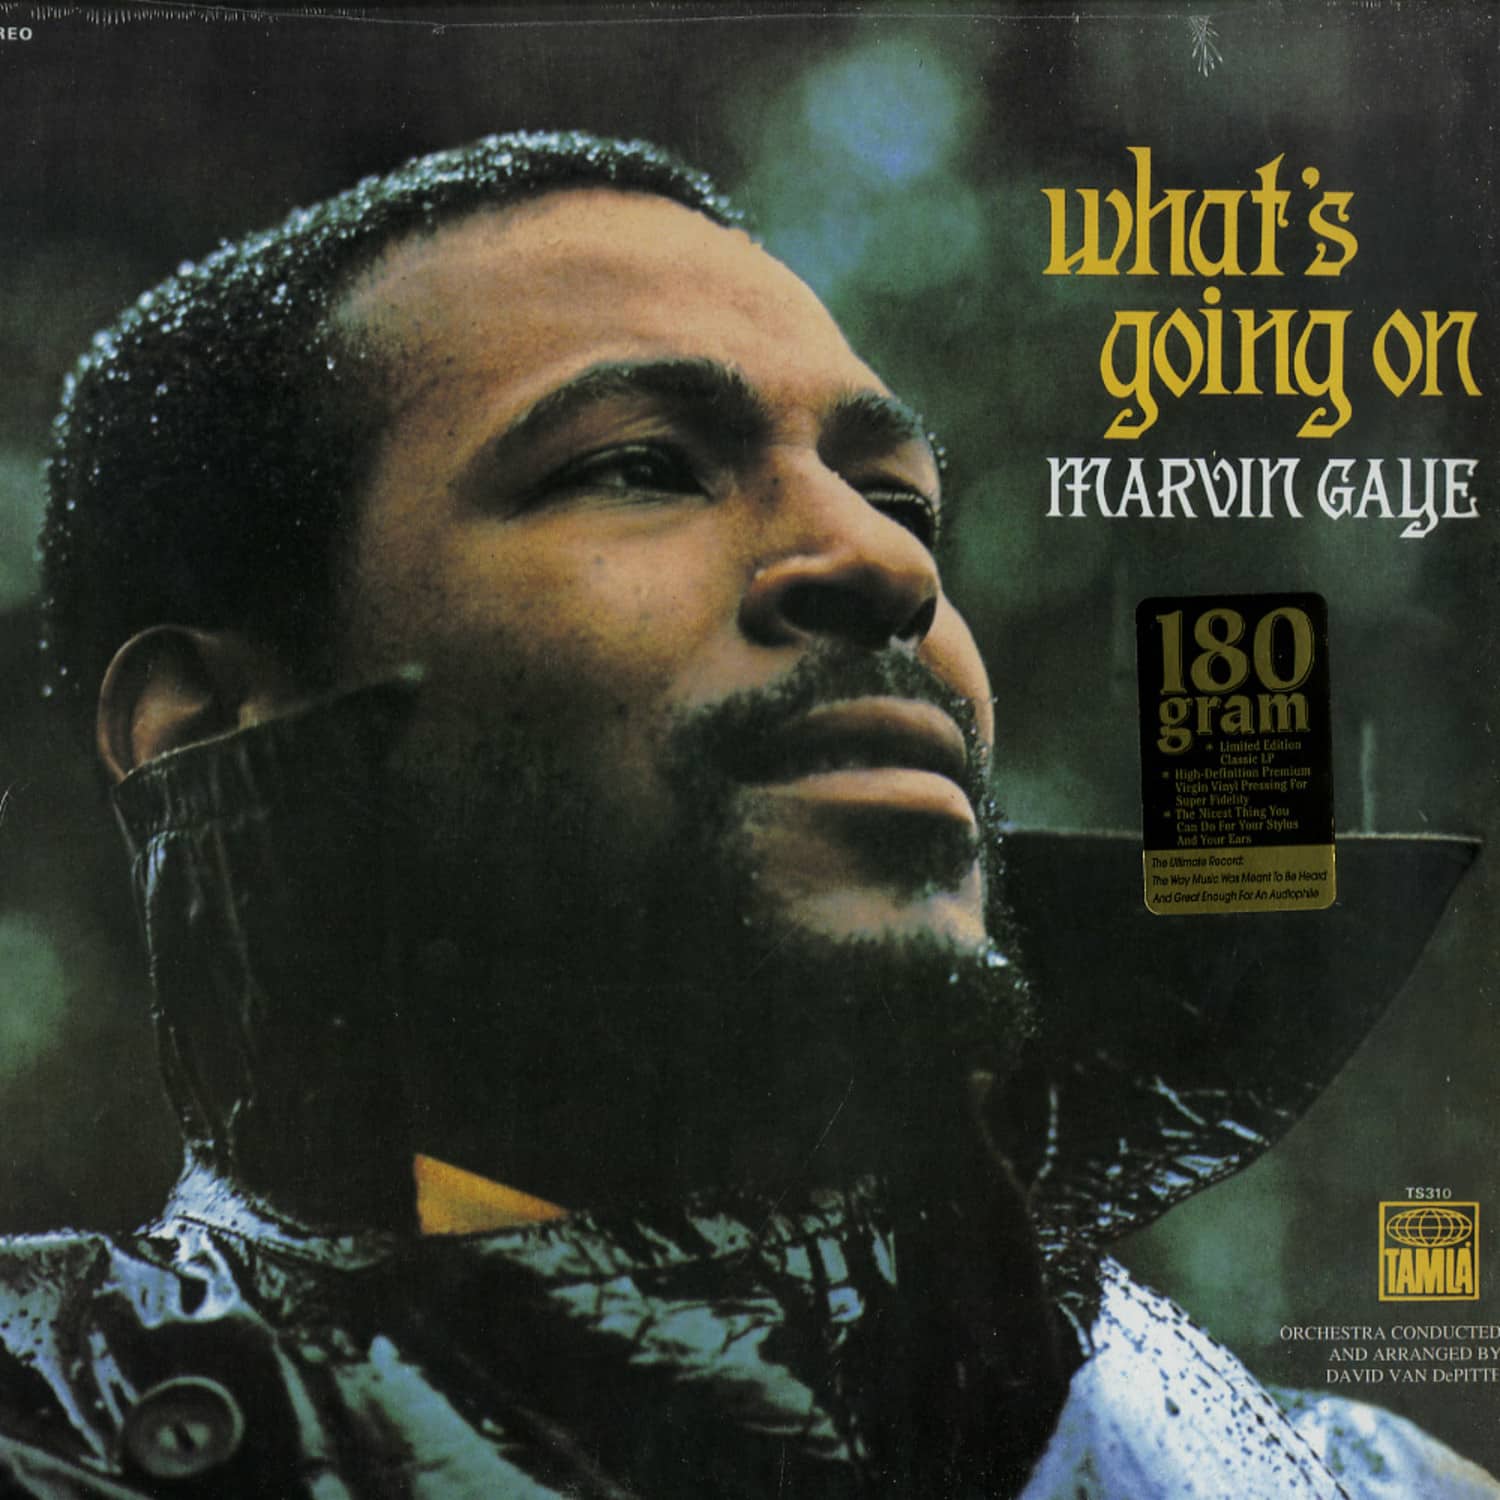 Marvin Gaye - WHATS GOING ON 